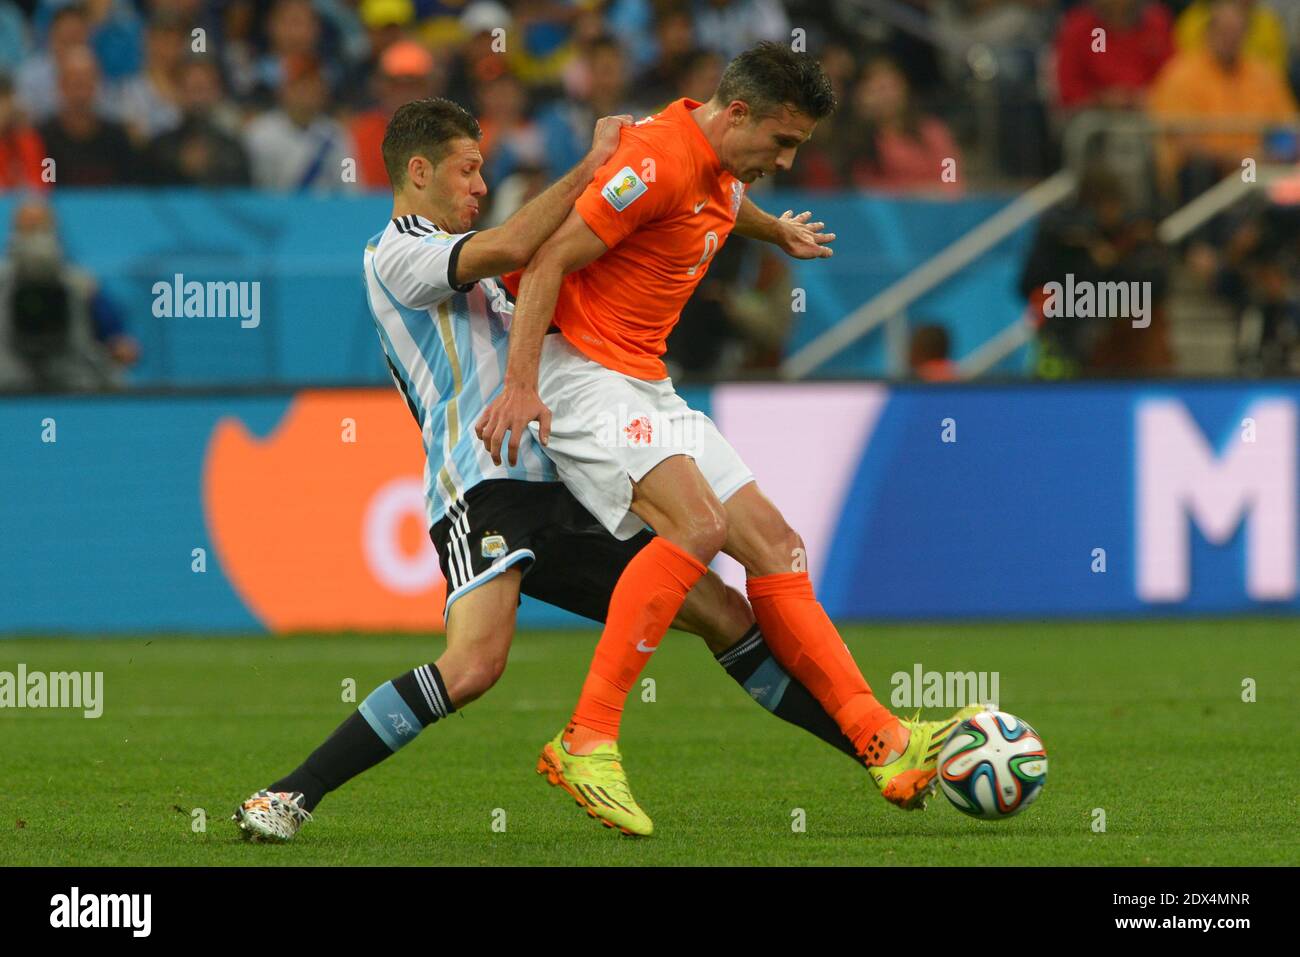 Netherlands's Robin van Persie battling Argentina's Martin Demichelis during Soccer World Cup Semi Final match Netherlands v Argentina at Itaquera Stadium, Sao Paulo, Brazil on July 9, 2014. Argentina won on the penalty shoot-out 5-3 after a 0-0 score. Photo by Henri Szwarc/ABACAPRESS.COM Stock Photo